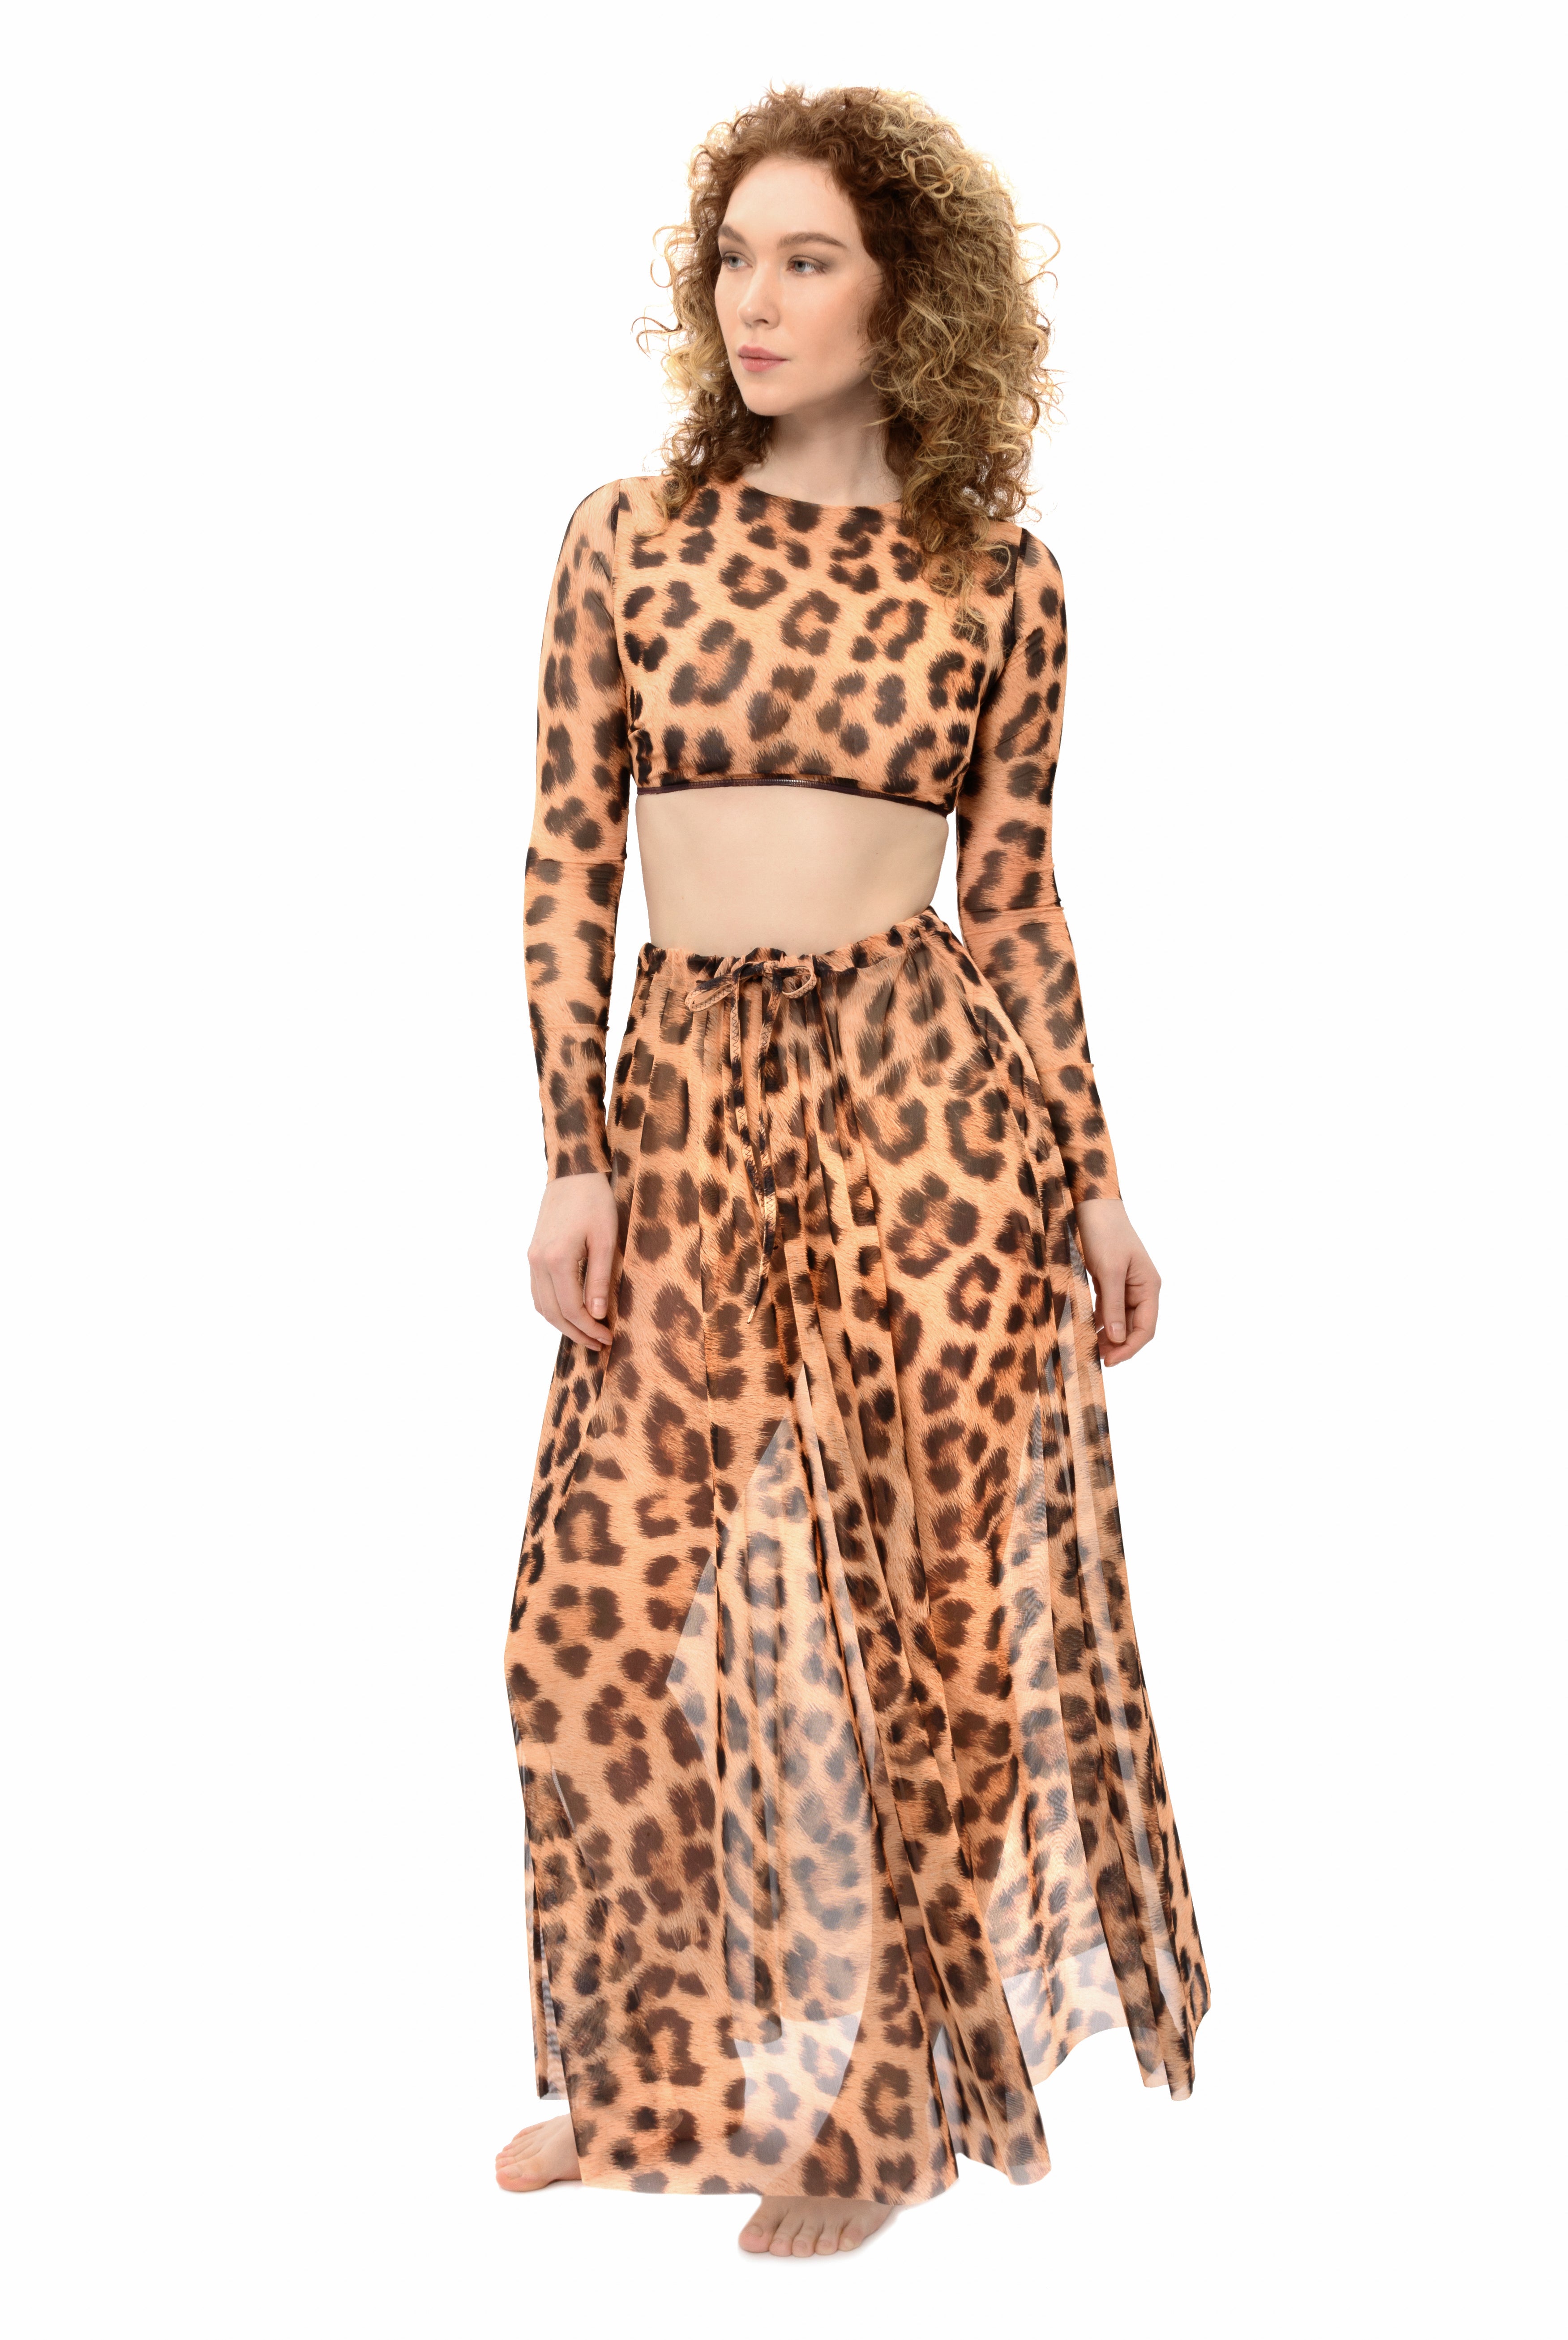 This file presents sustainable tan-through smart swimwear featuring the iconic leopard print. Highlighting a beach skirt showcased on the runway, it offers stylish options for your vacation wardrobe.